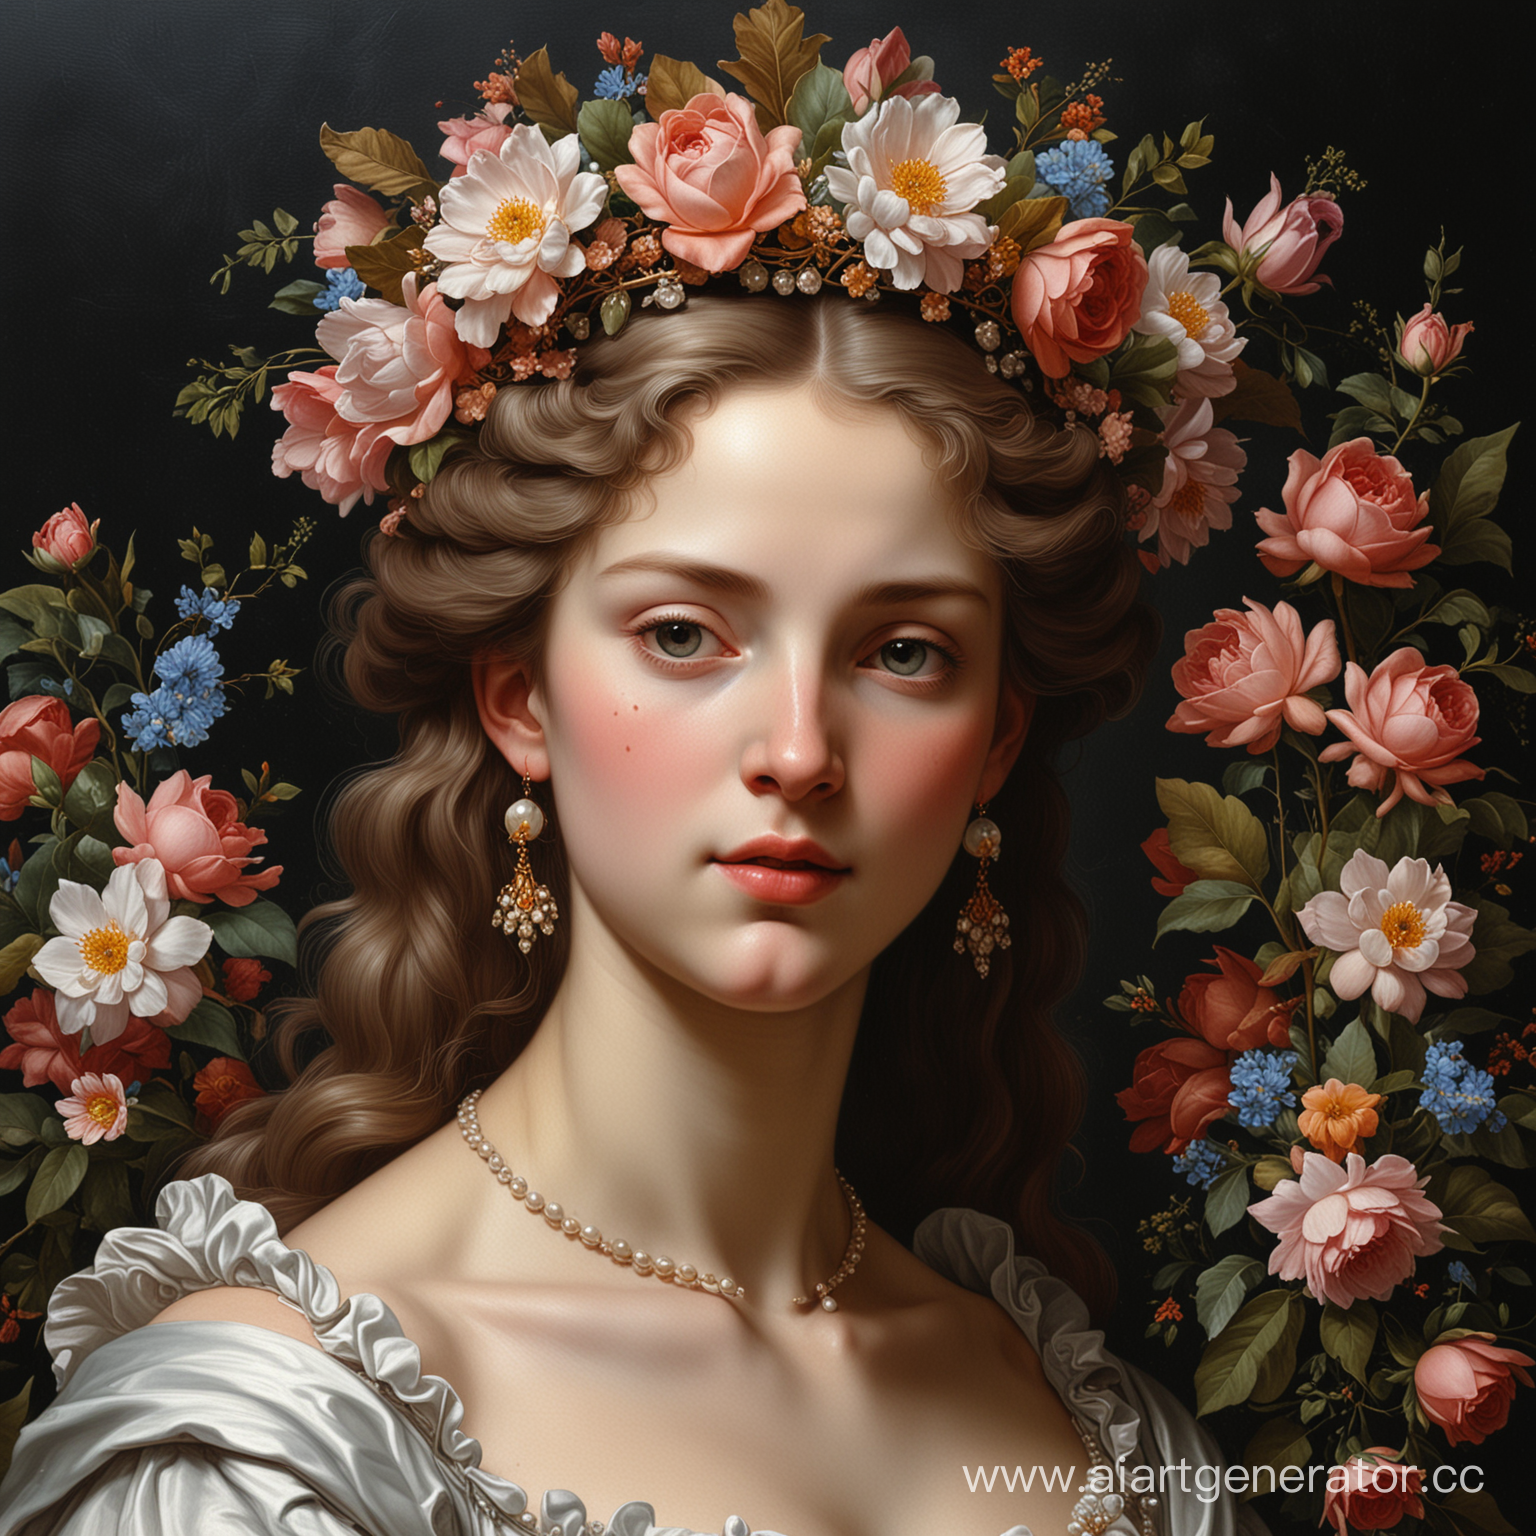 Detailed Michelangelo oil painting on a dark background: a beautiful royal daughter surrounded by flowers, with a pearl crown on her head and neck